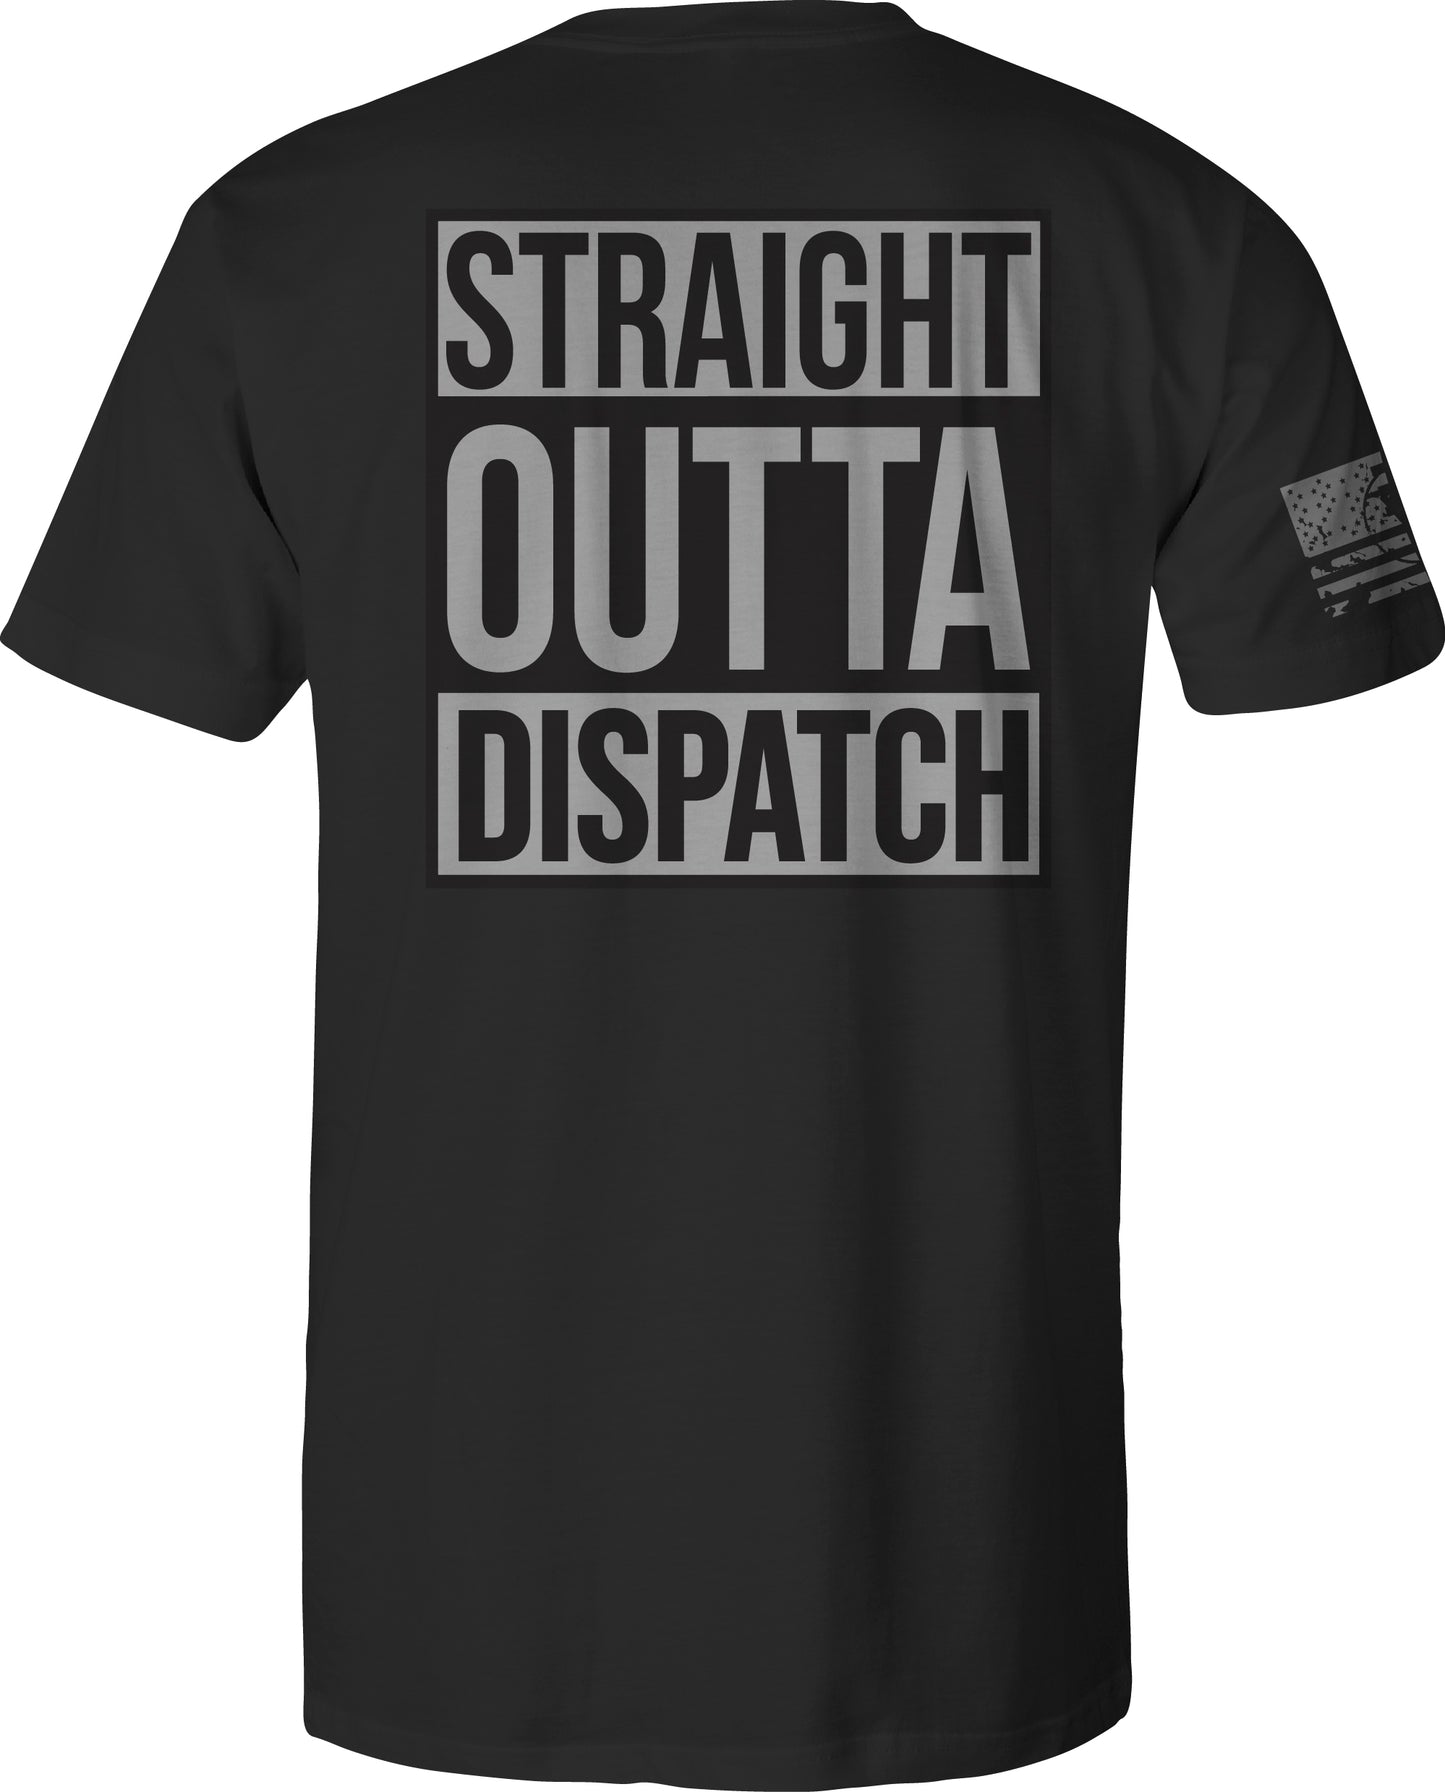 Straight Outta Dispatch Tee